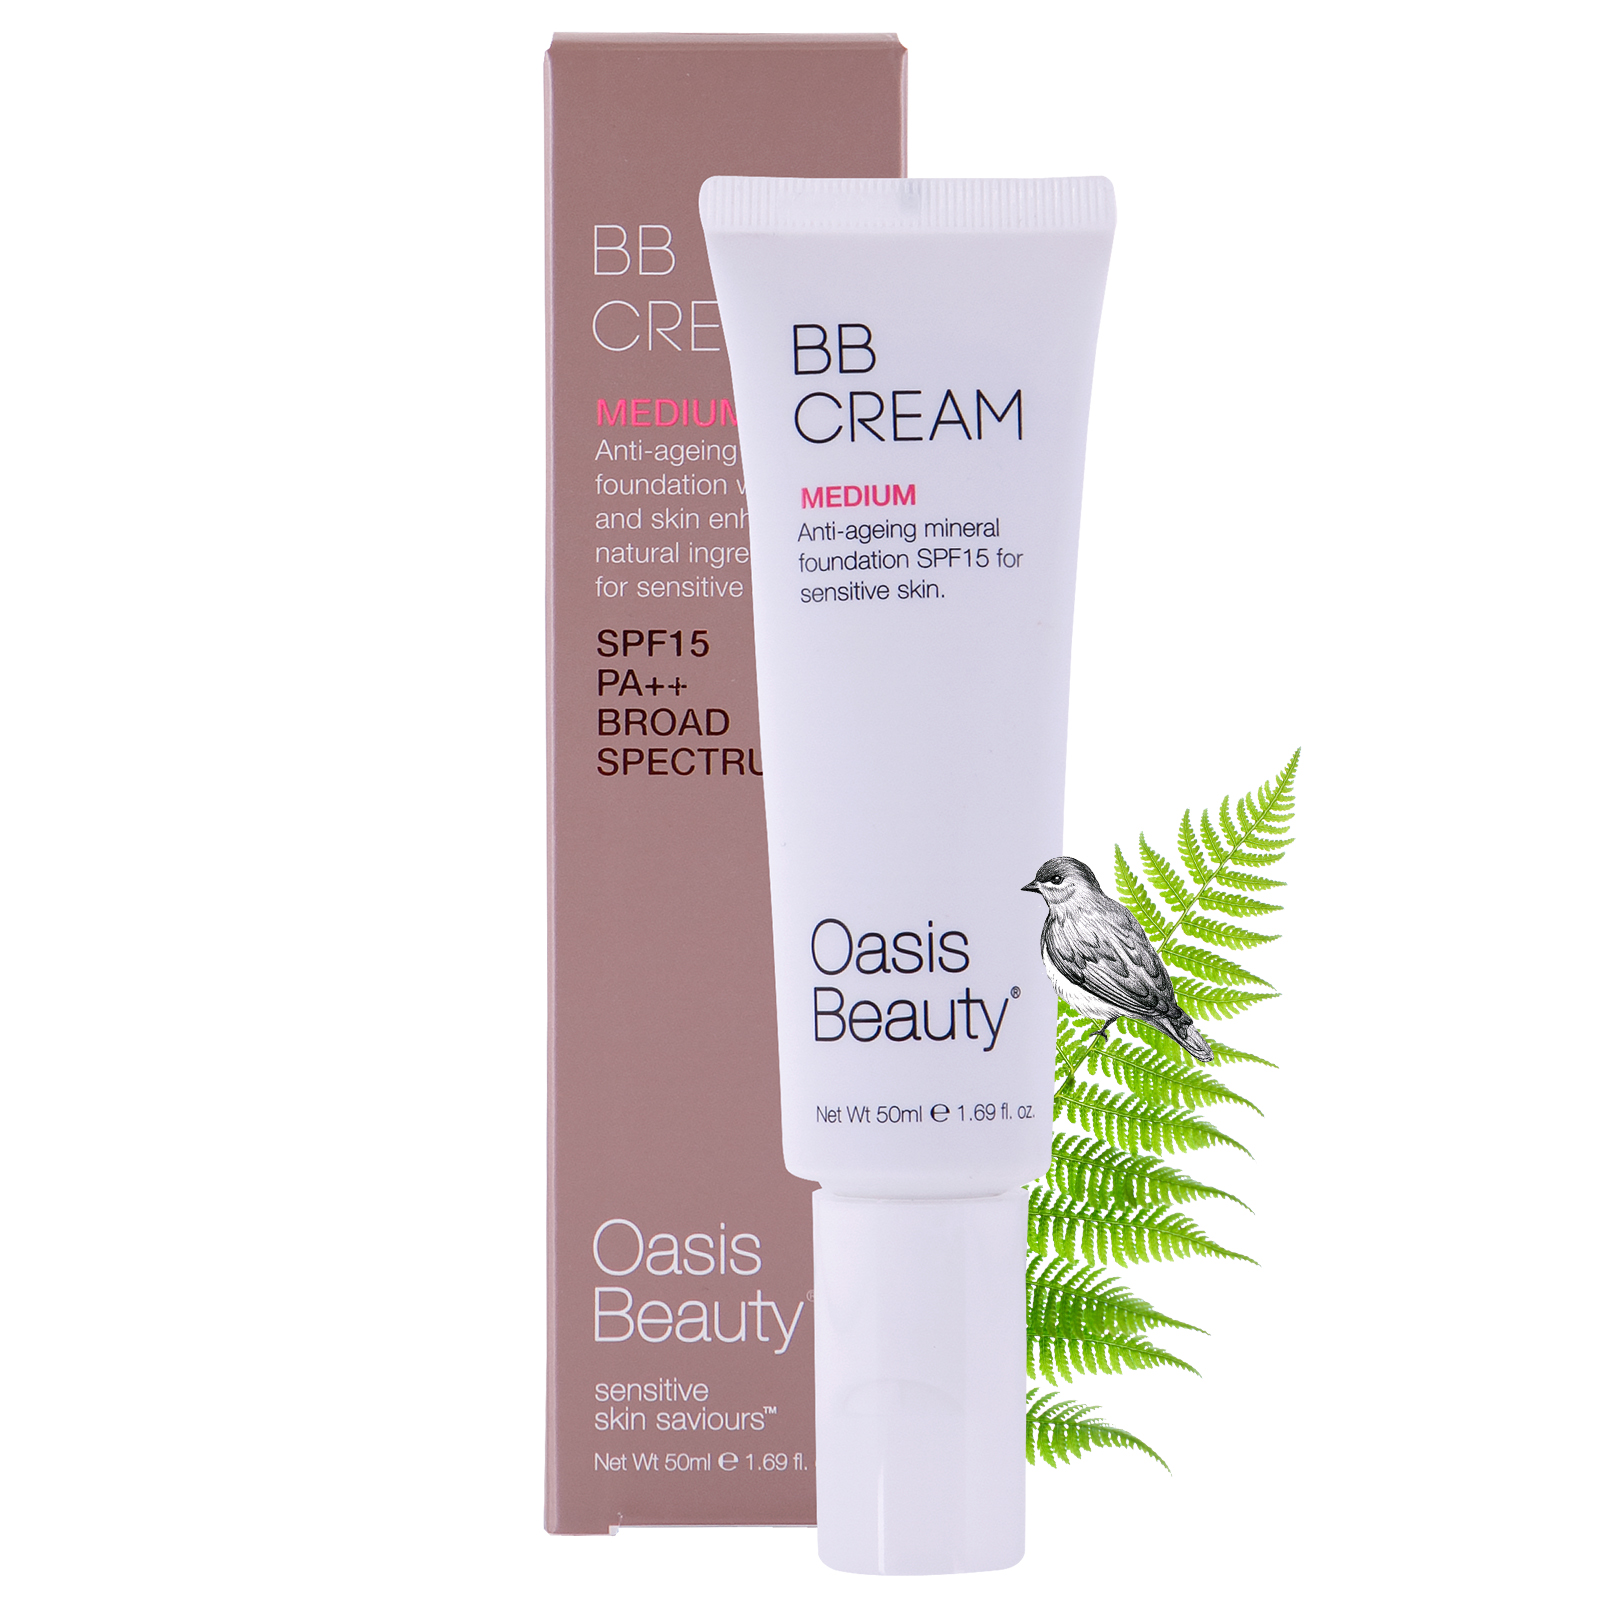 Hardy's Health Stores - Oasis BB Cream